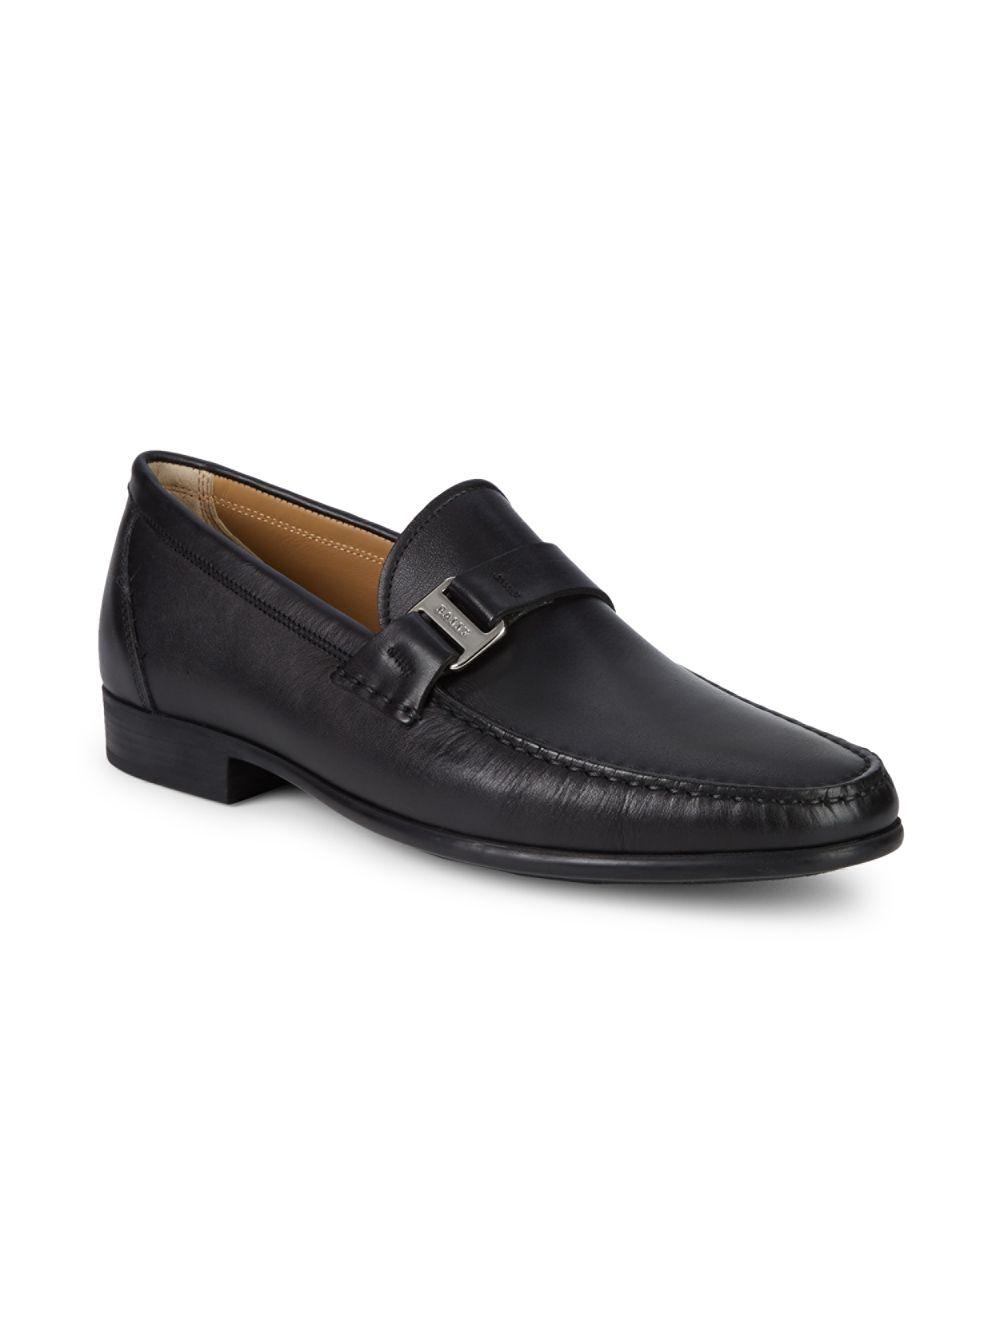 Bally Colbar Leather Loafers in Black - Lyst